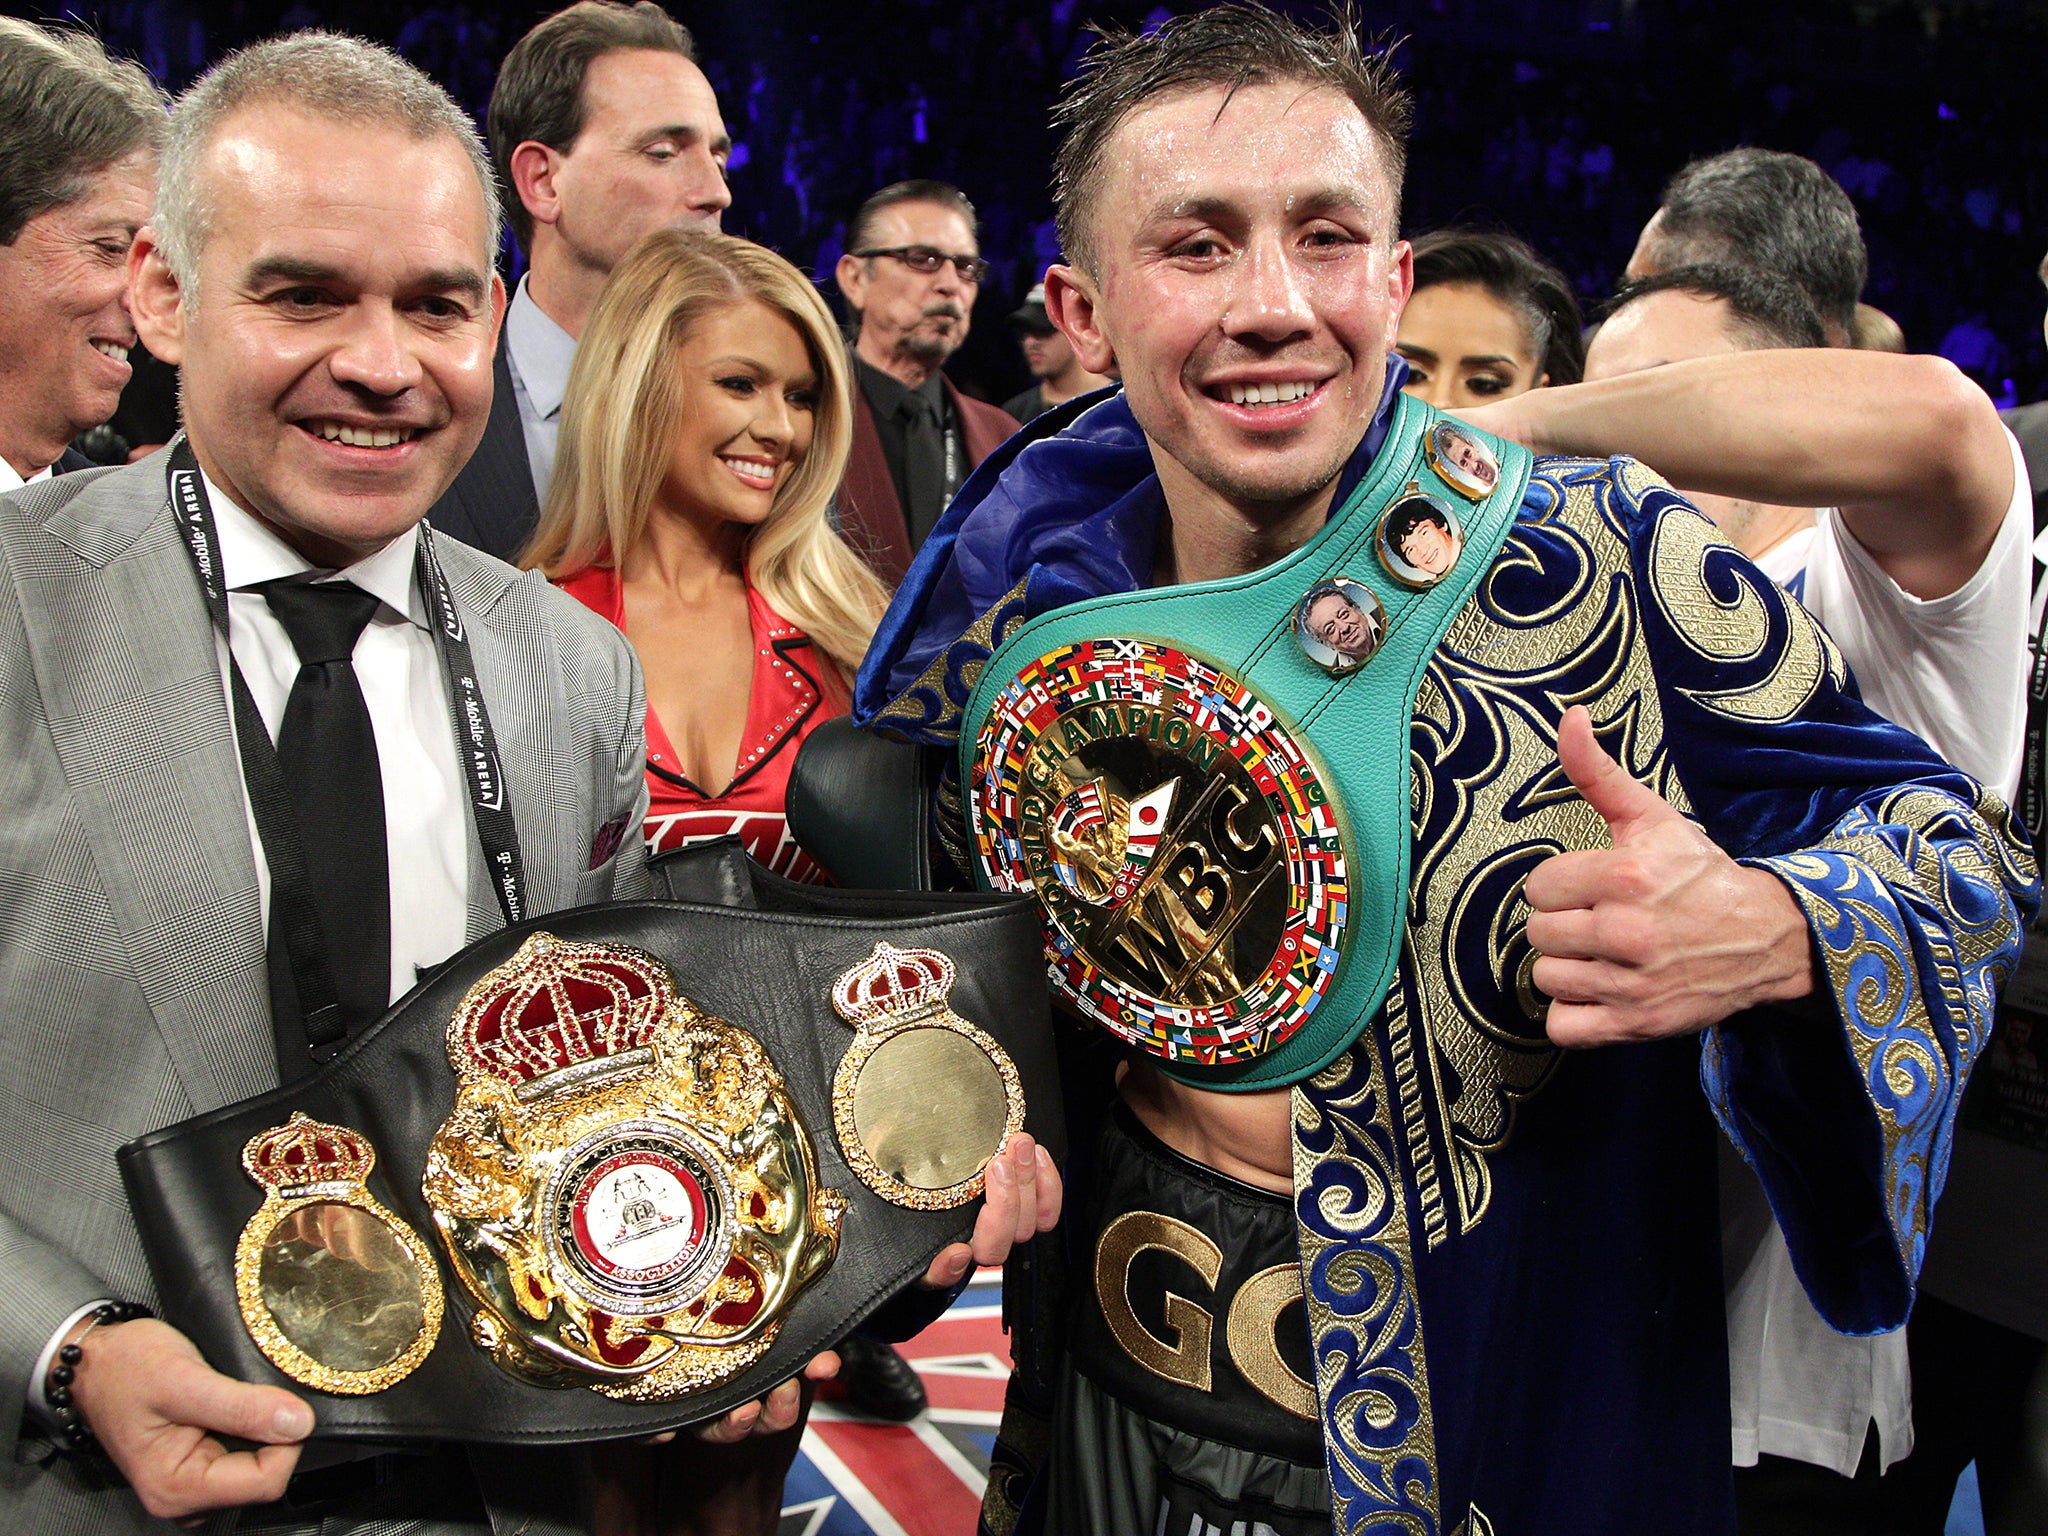 Gennady Golovkin has been stripped of the IBF middleweight title